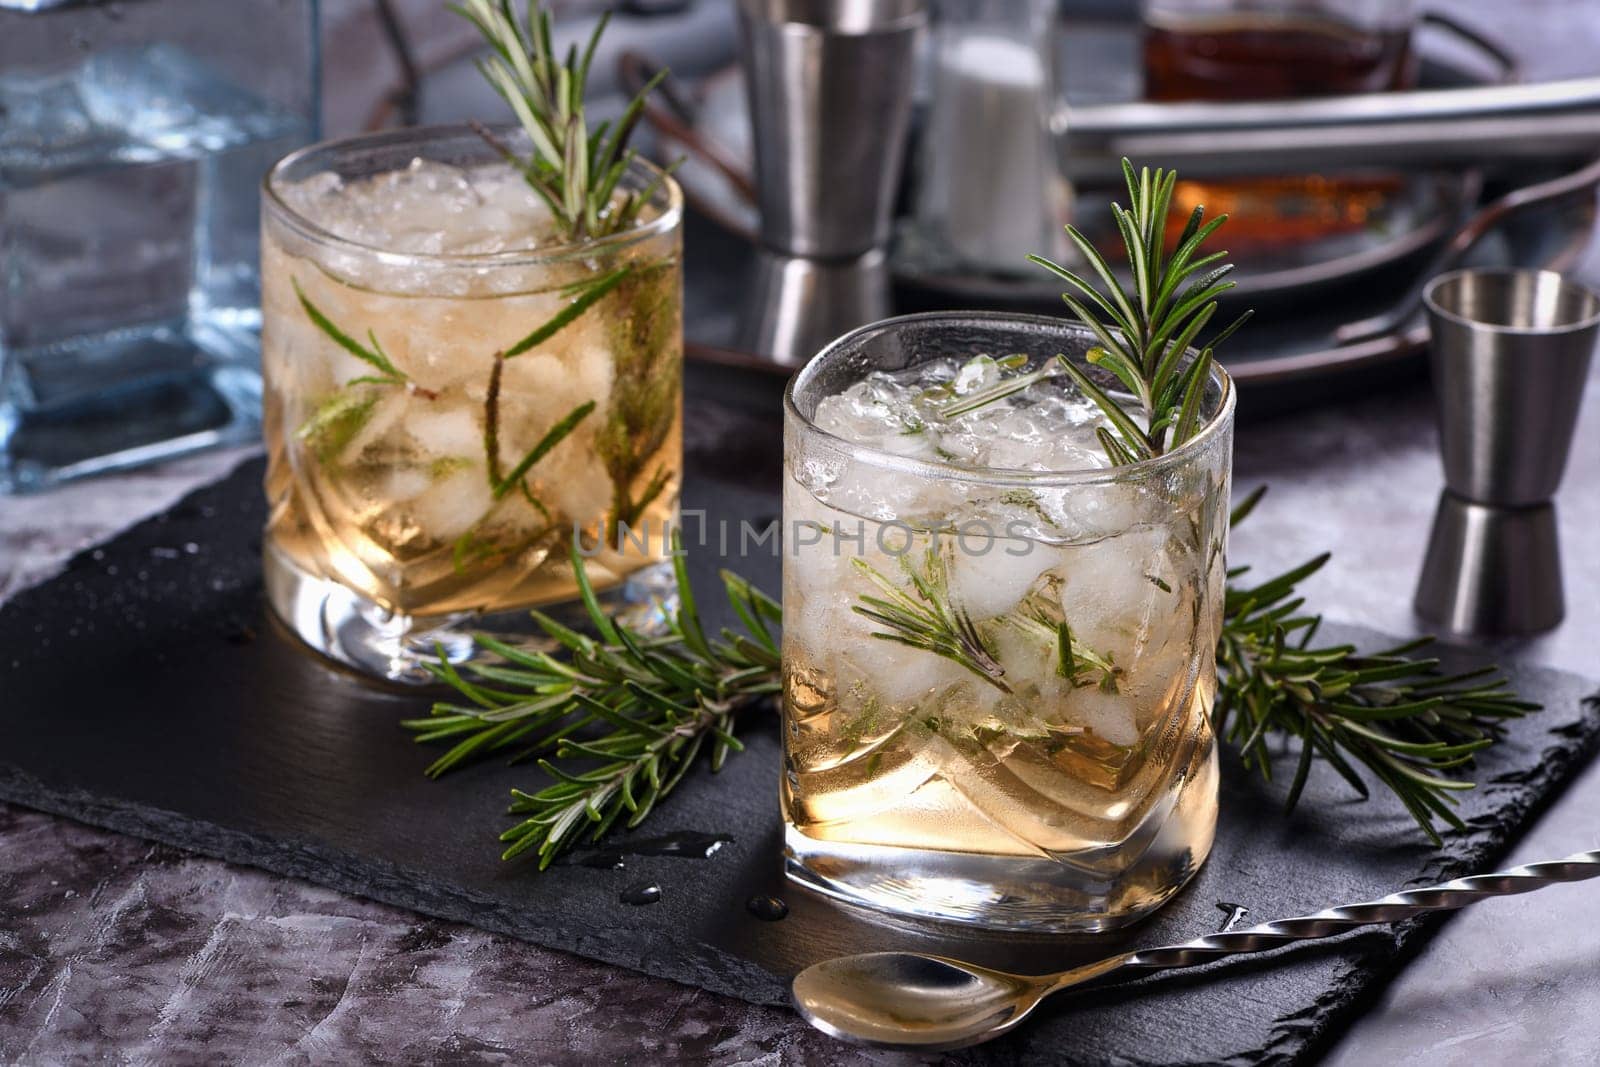 The Rosemary Vodka cocktail consists of maple syrup with a small amount of salt, rosemary, crushed ice and vodka. Vodka can be replaced with other alcohol - tequila, white rum, gin.  м